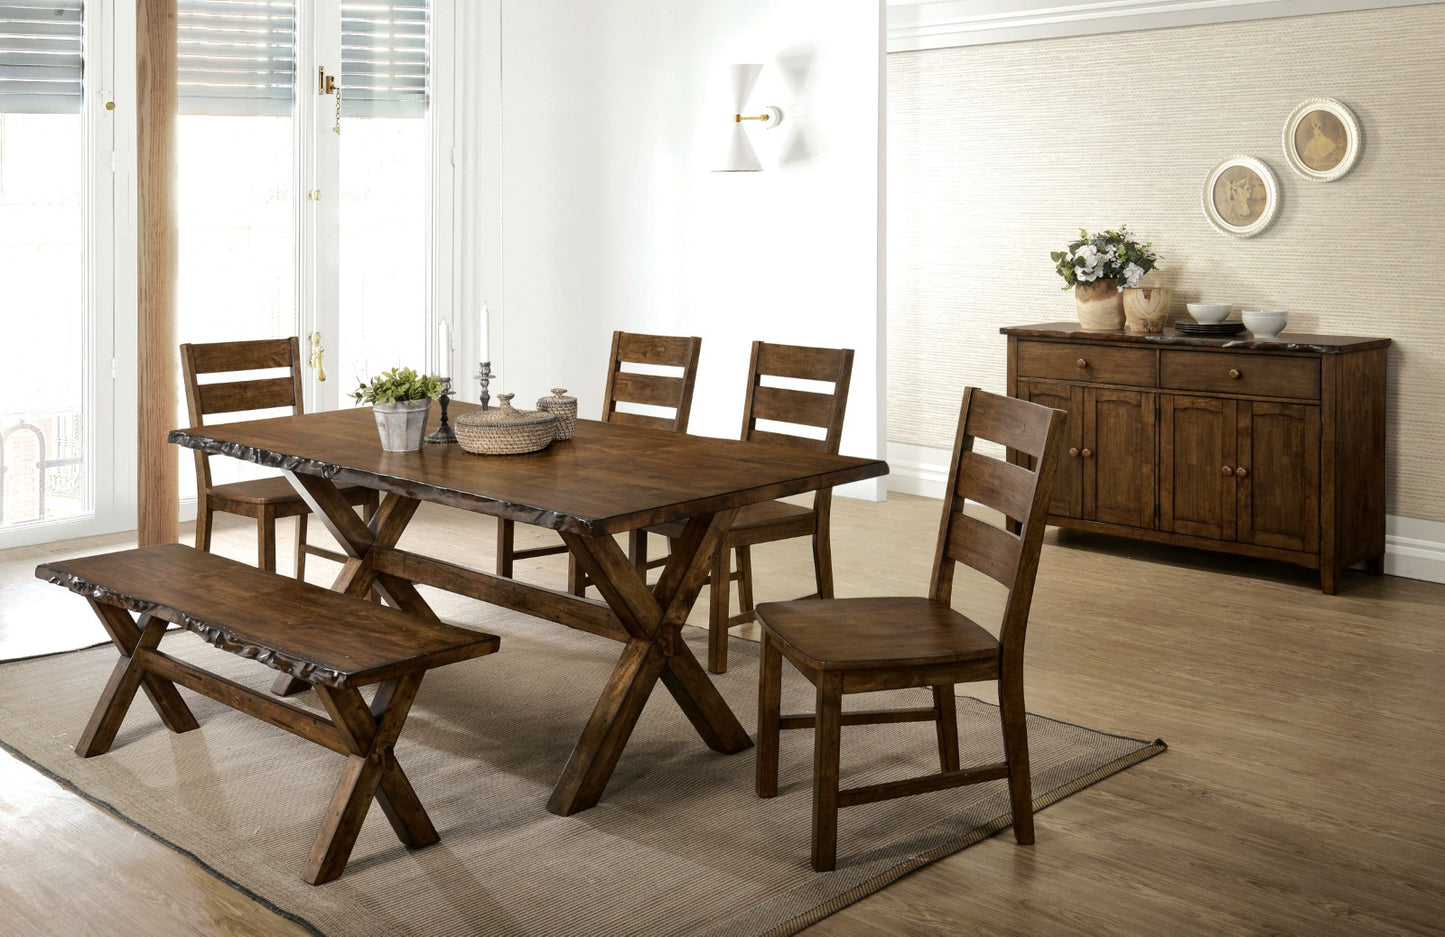 Furniture of America Woodworth Walnut 6 Pc. Dining Table Set w/ Bench